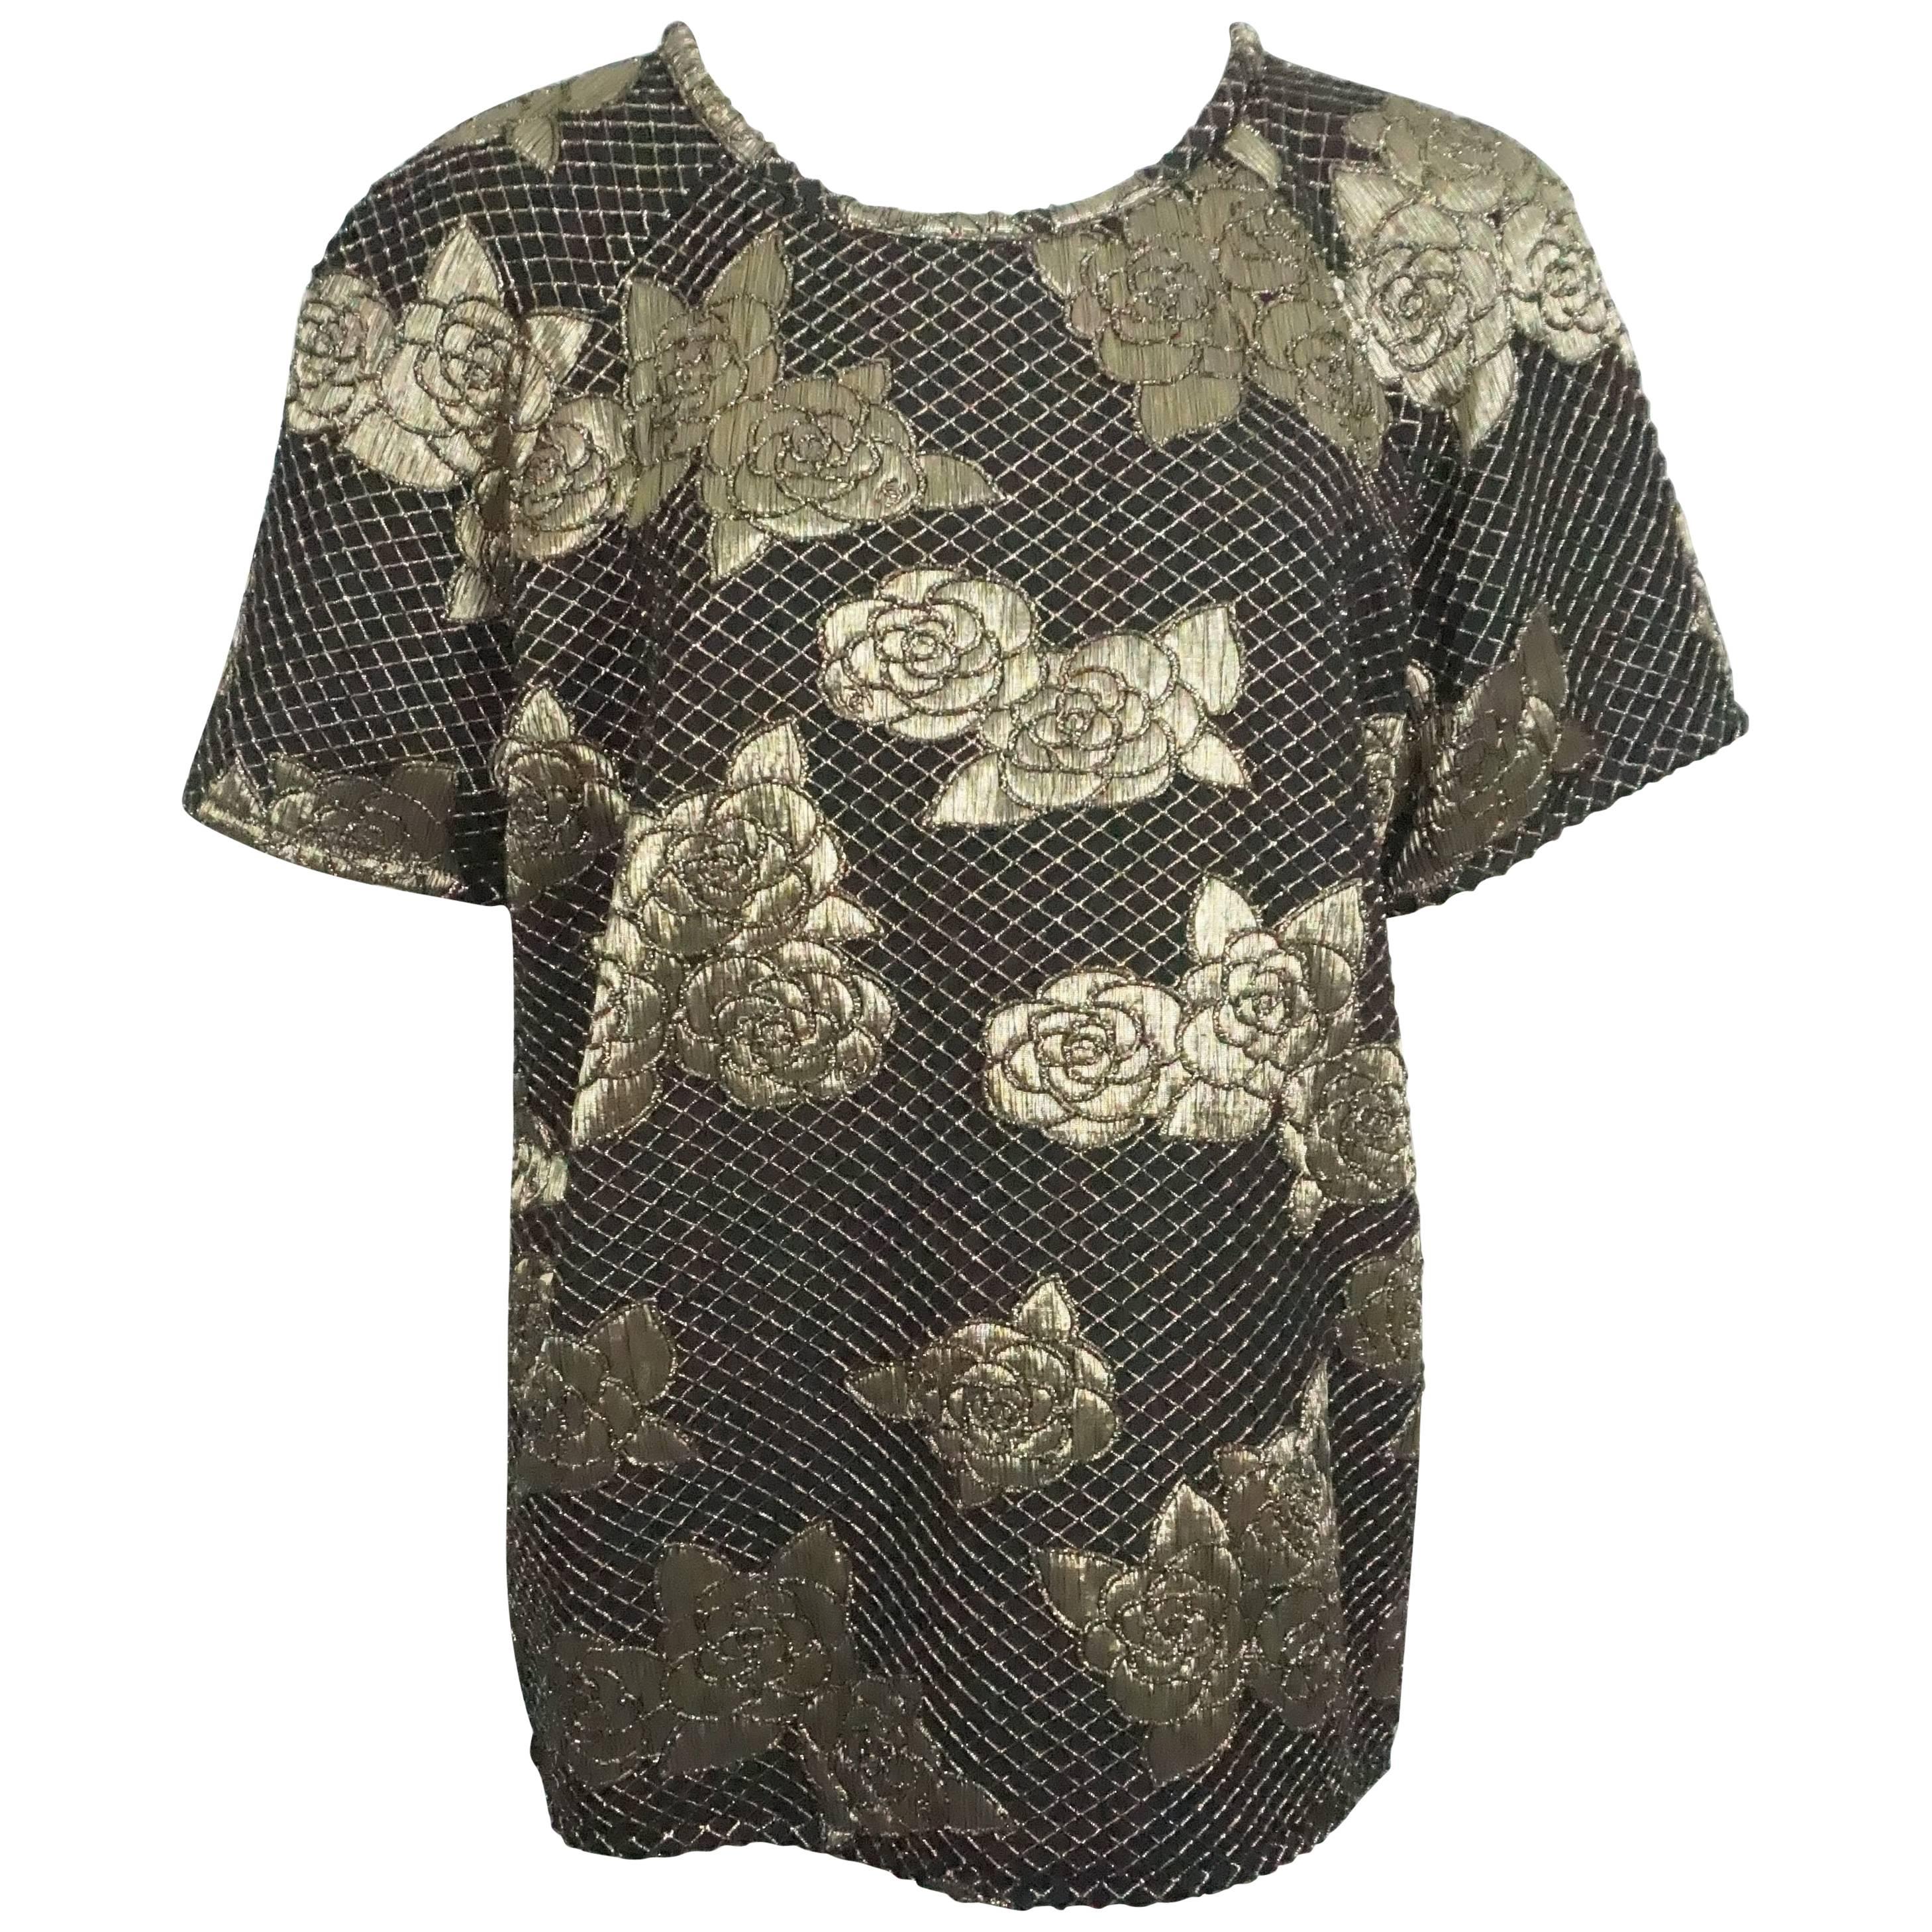 Chanel Black and Gold Brocade Top S/S 